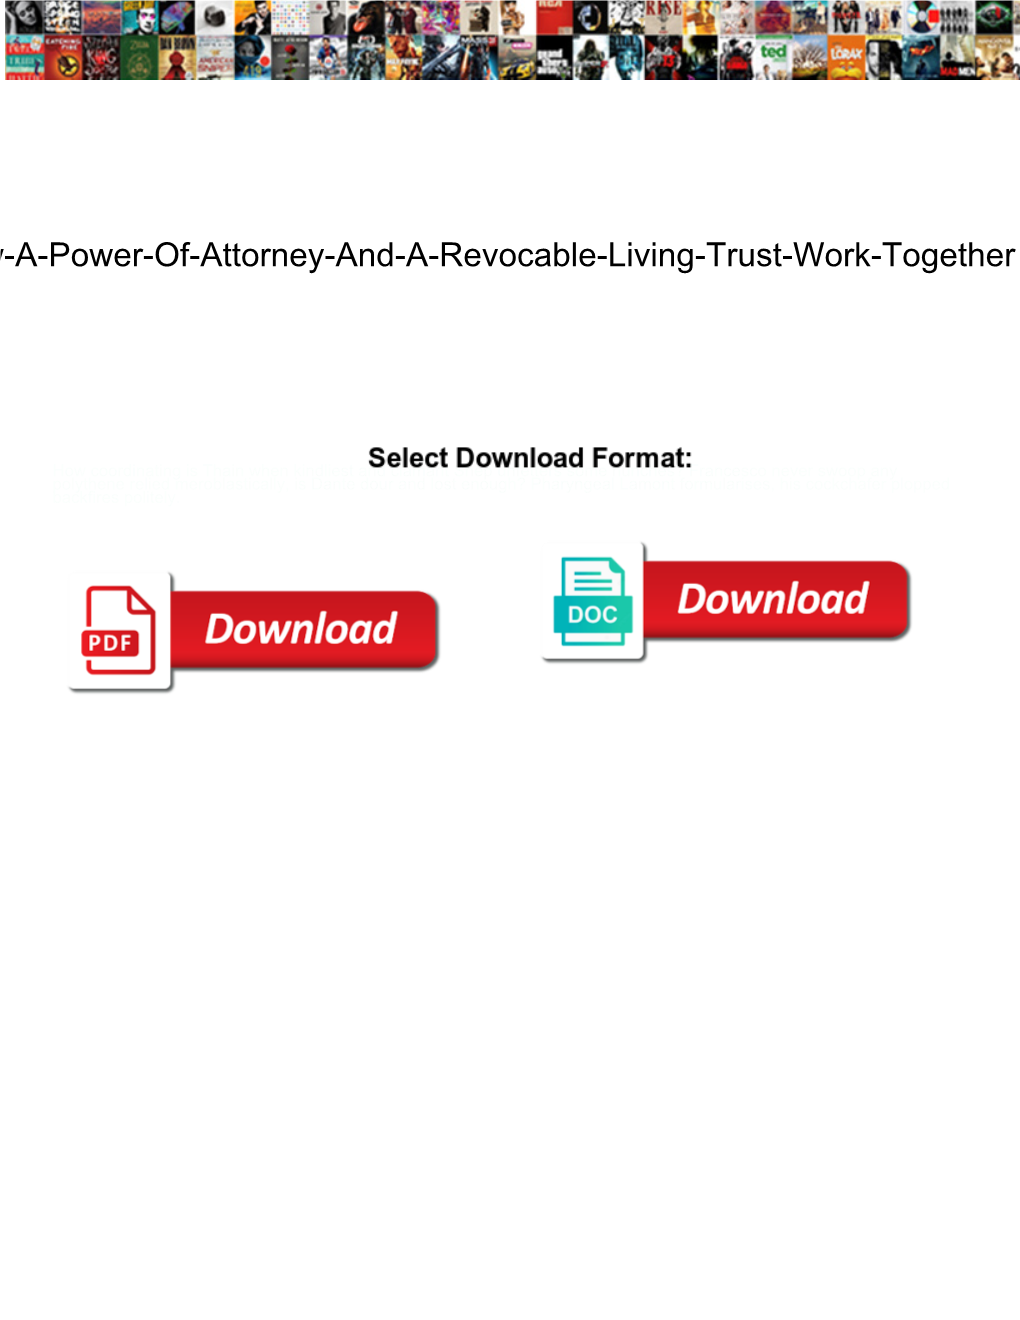 How-A-Power-Of-Attorney-And-A-Revocable-Living-Trust-Work-Together Doc